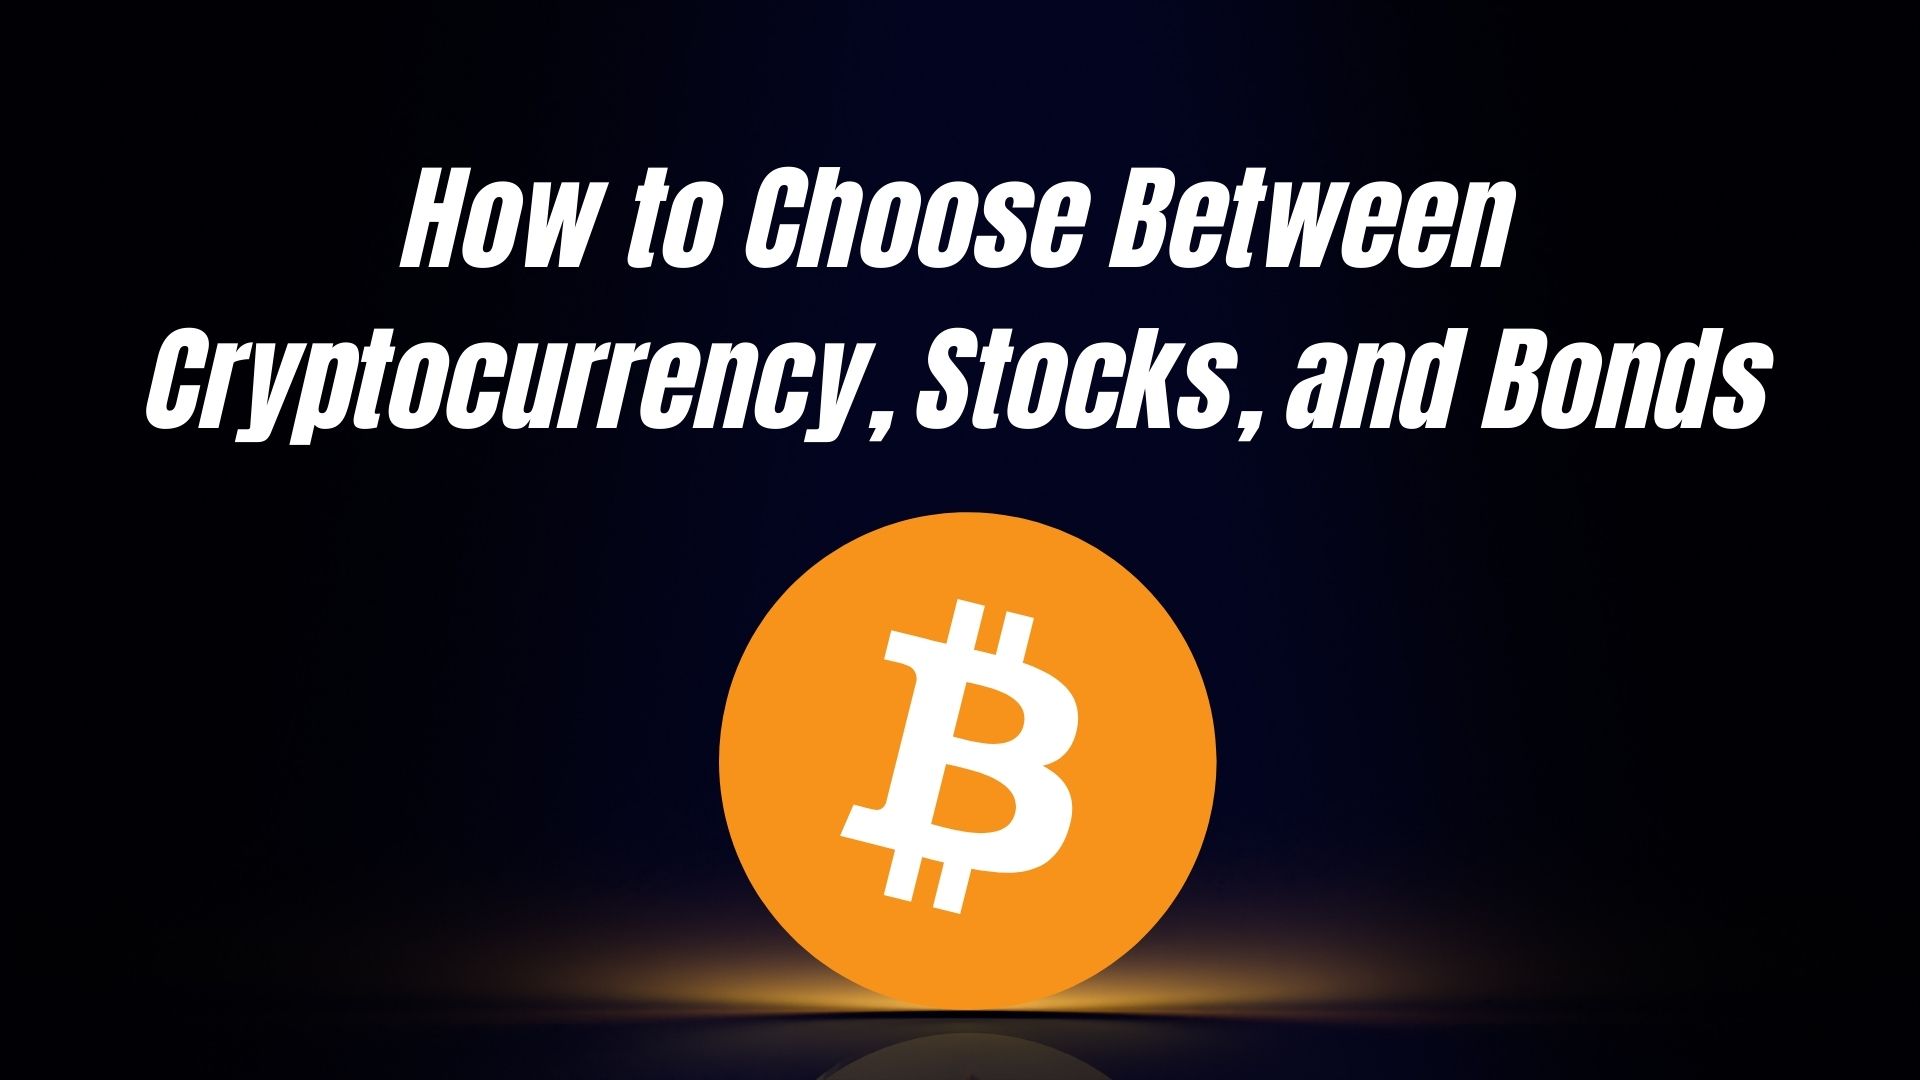 How to Choose Between Cryptocurrency, Stocks, and Bonds